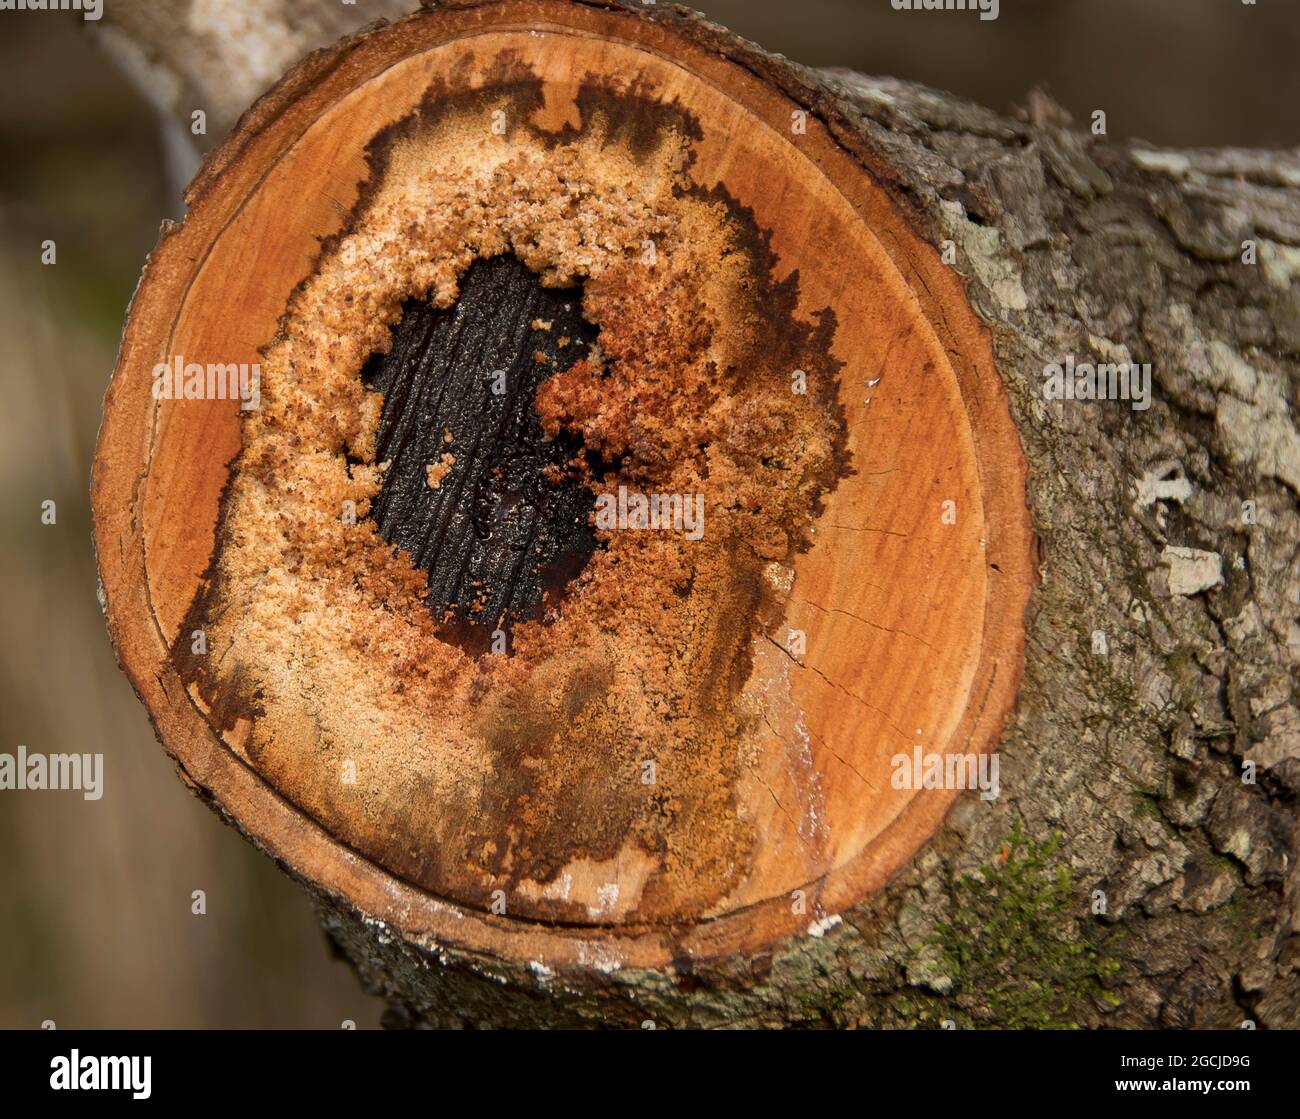 Freshly sawn log of avocado tree. Old dead wood surrounded  by newer growth. Pruning avocado tree, persea americana, autumn, Australian orchard Stock Photo